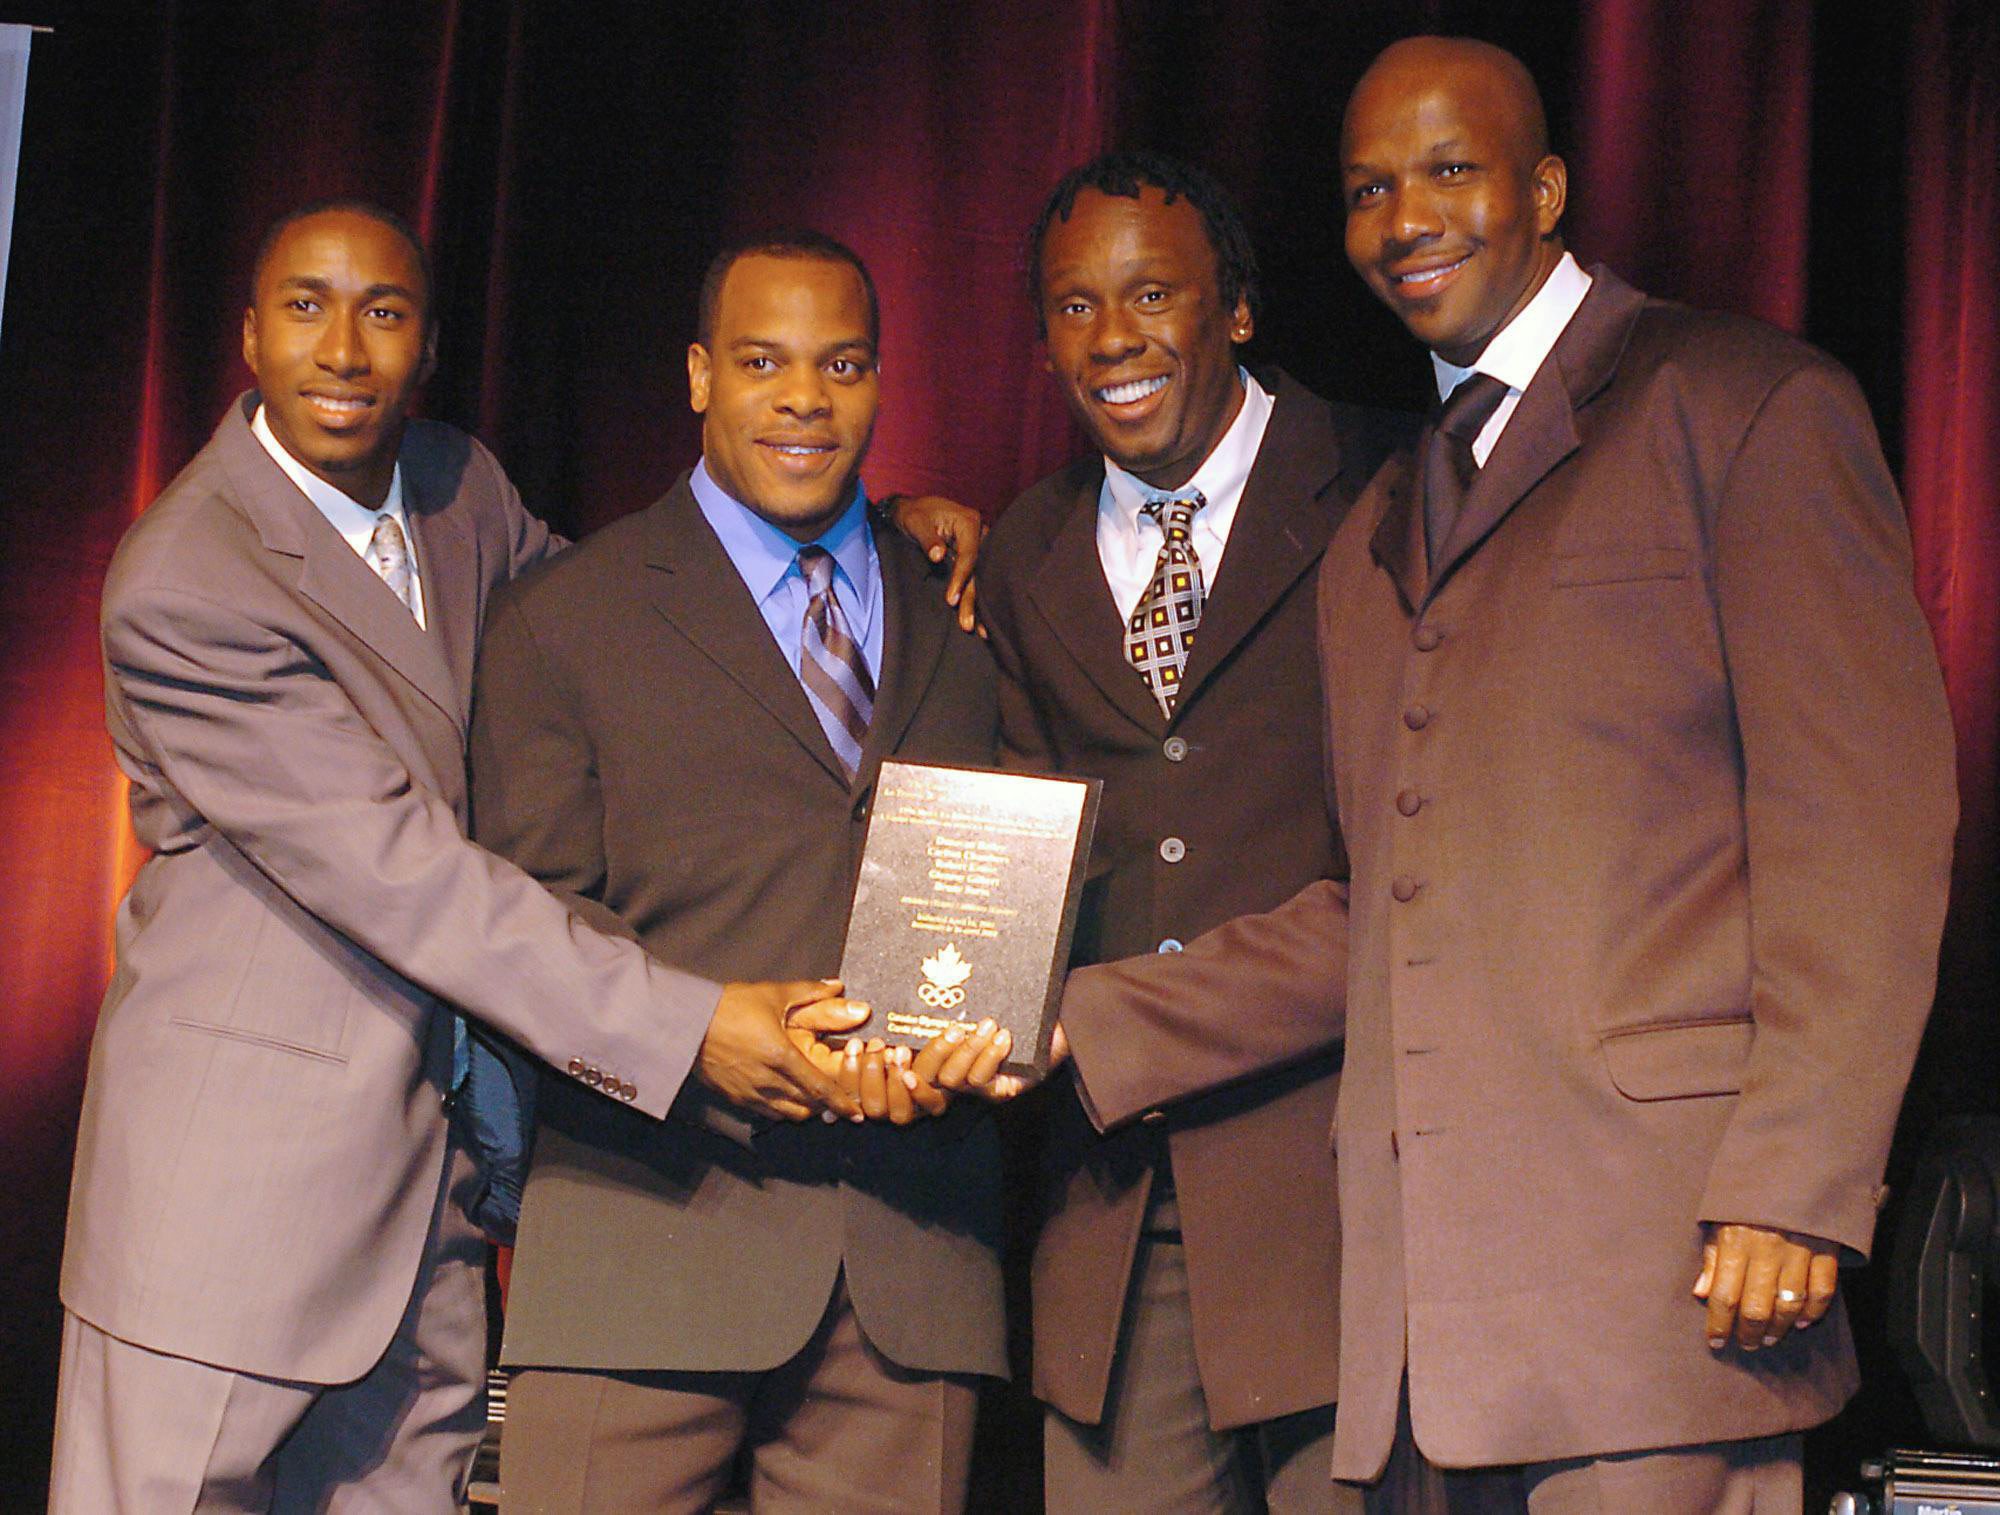 New inductees into Canadian Hall of Fame, members of the 400m olympic race, Robert Esmie, Carlton Chambers, Bruny Surin and Donovan Bailey during a ceremony in Montreal, Friday April 16, 2004. 